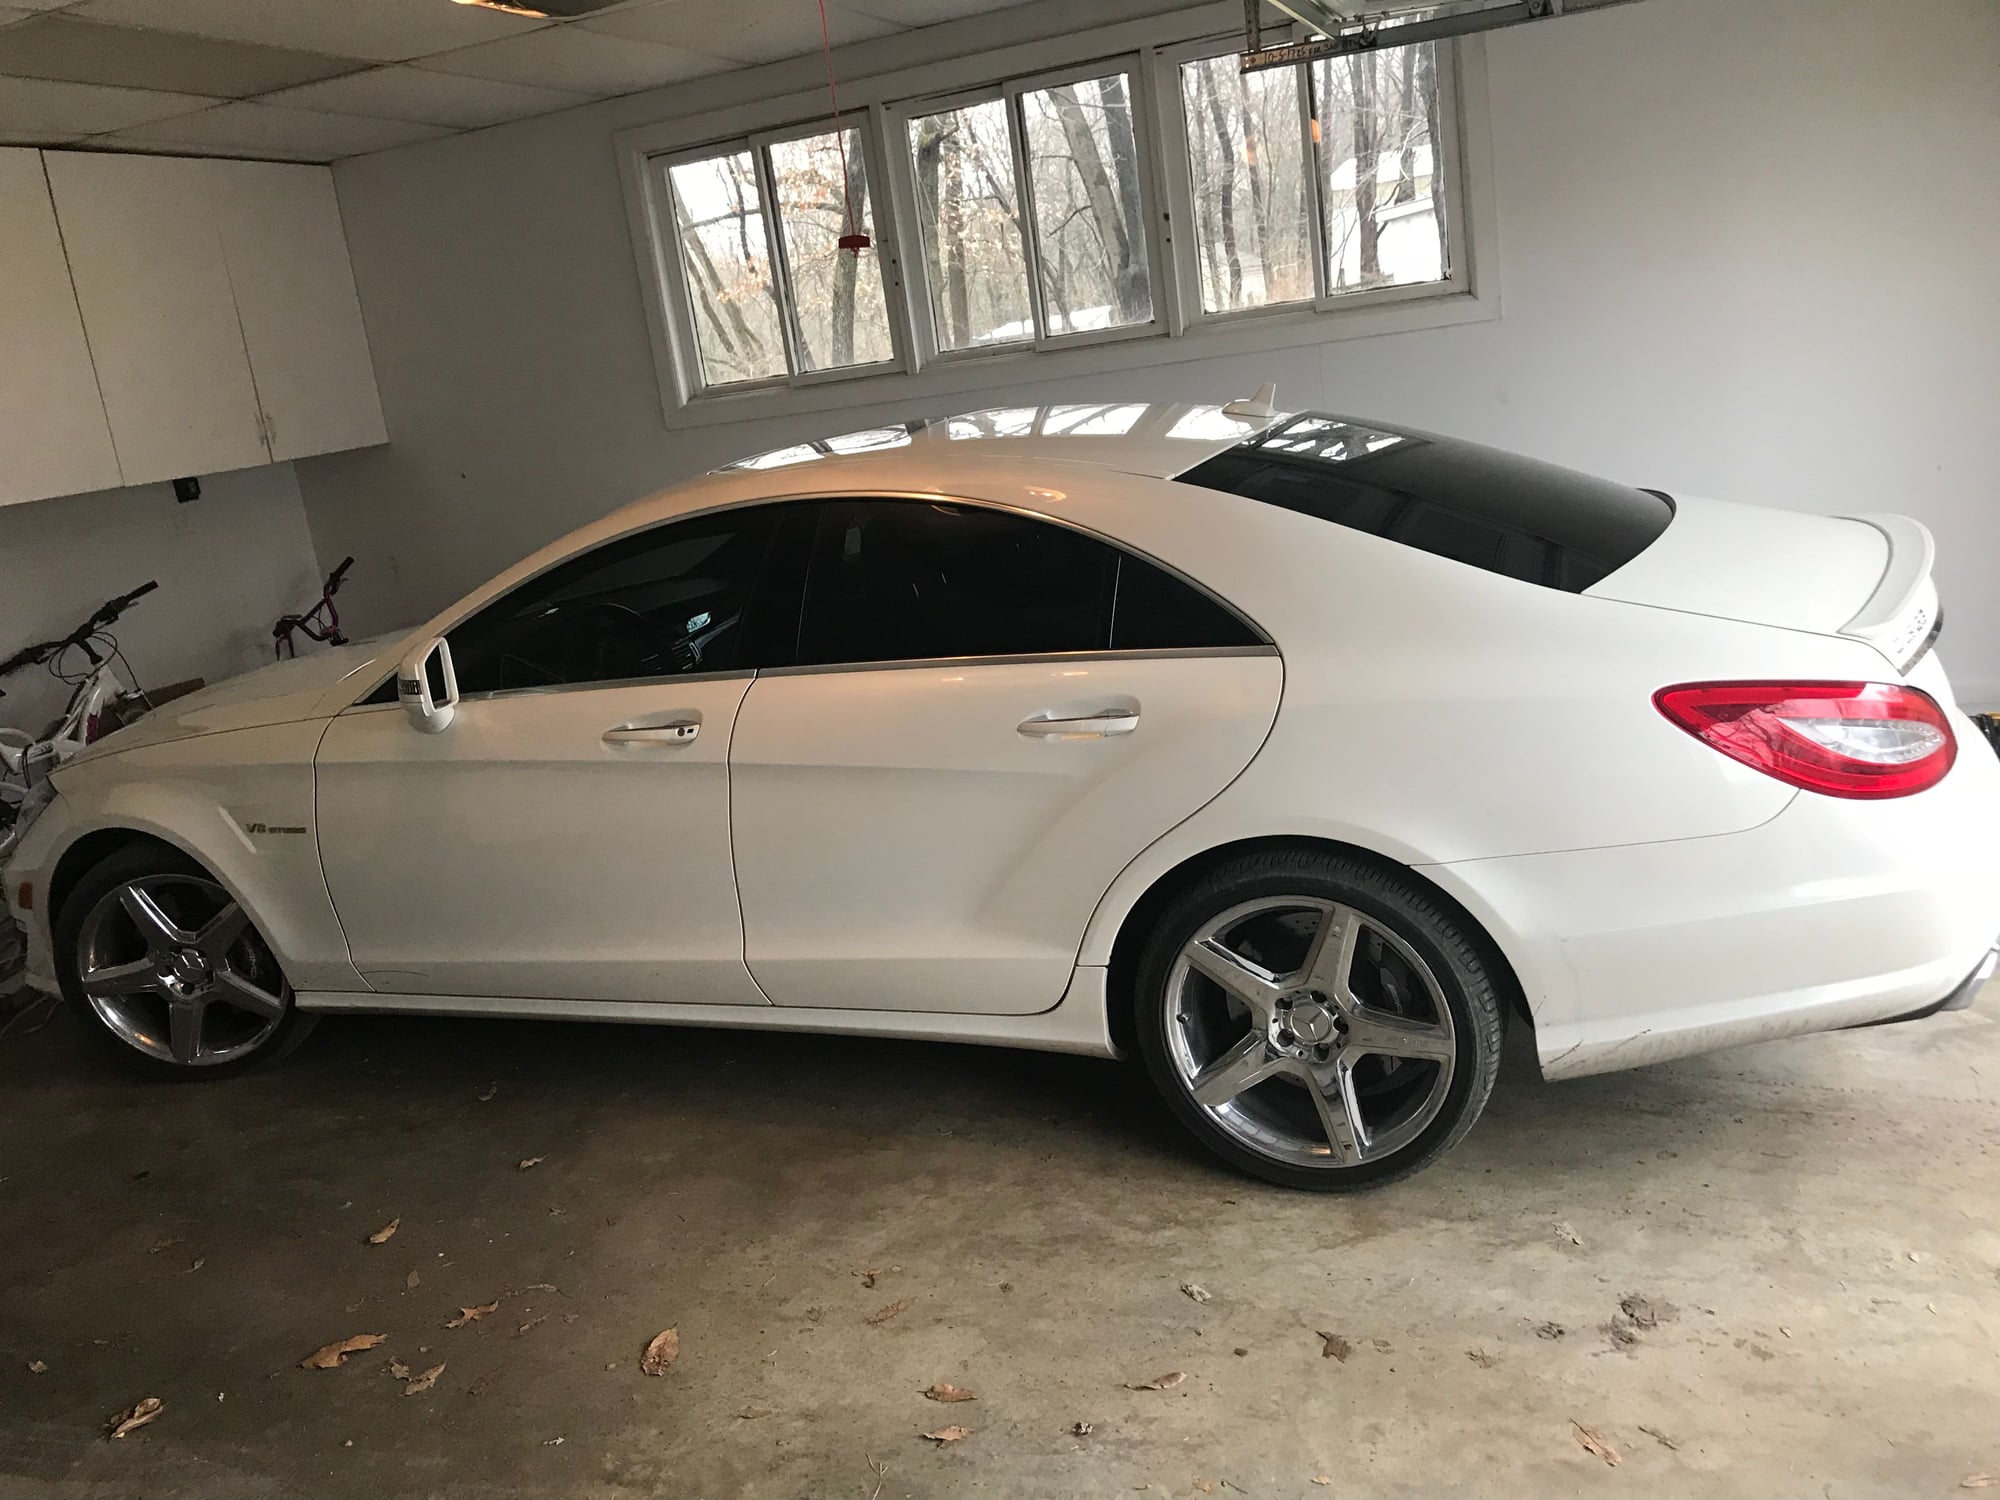 Wheels and Tires/Axles - Mercedes AMG chrome wheels 19 inch CLS Class - New - 2006 to 2014 Mercedes-Benz CLS63 AMG - Florissant, MO 63034, United States